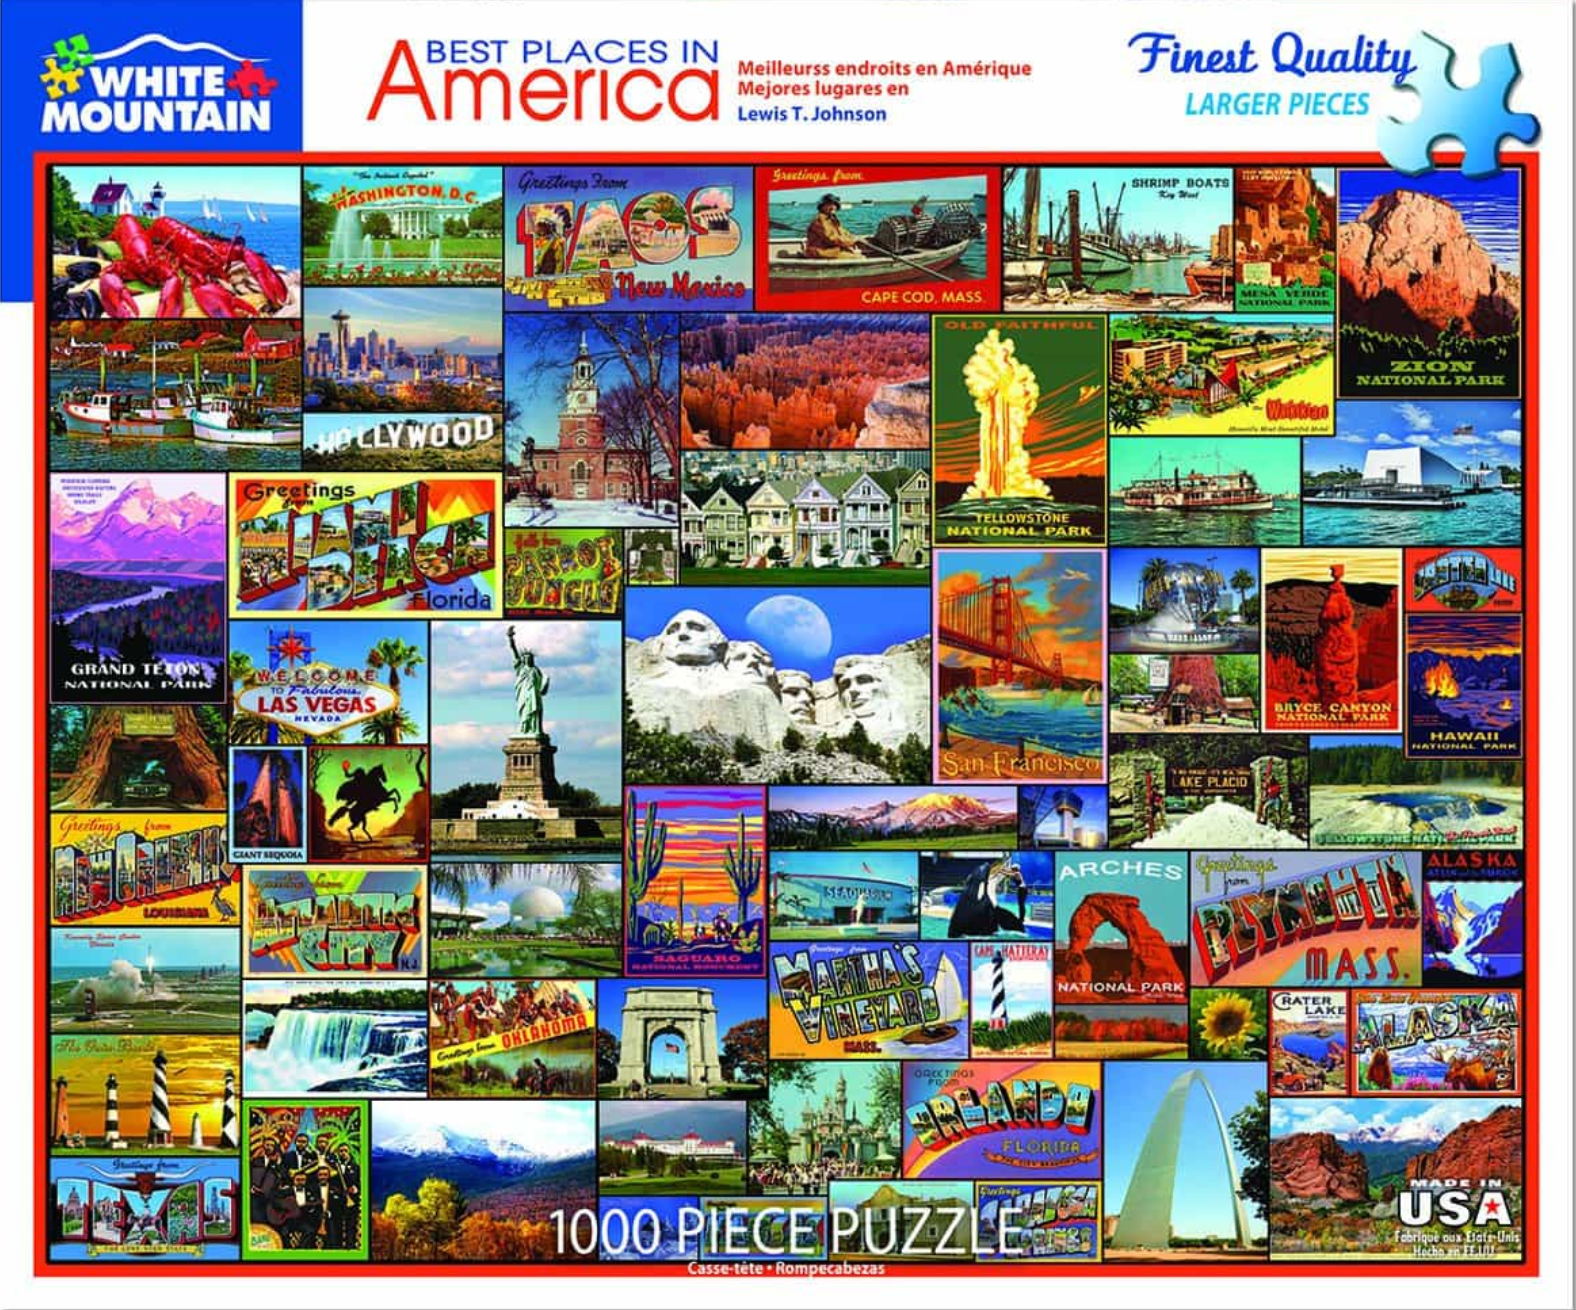 Best Places in America (1000 pc puzzle)